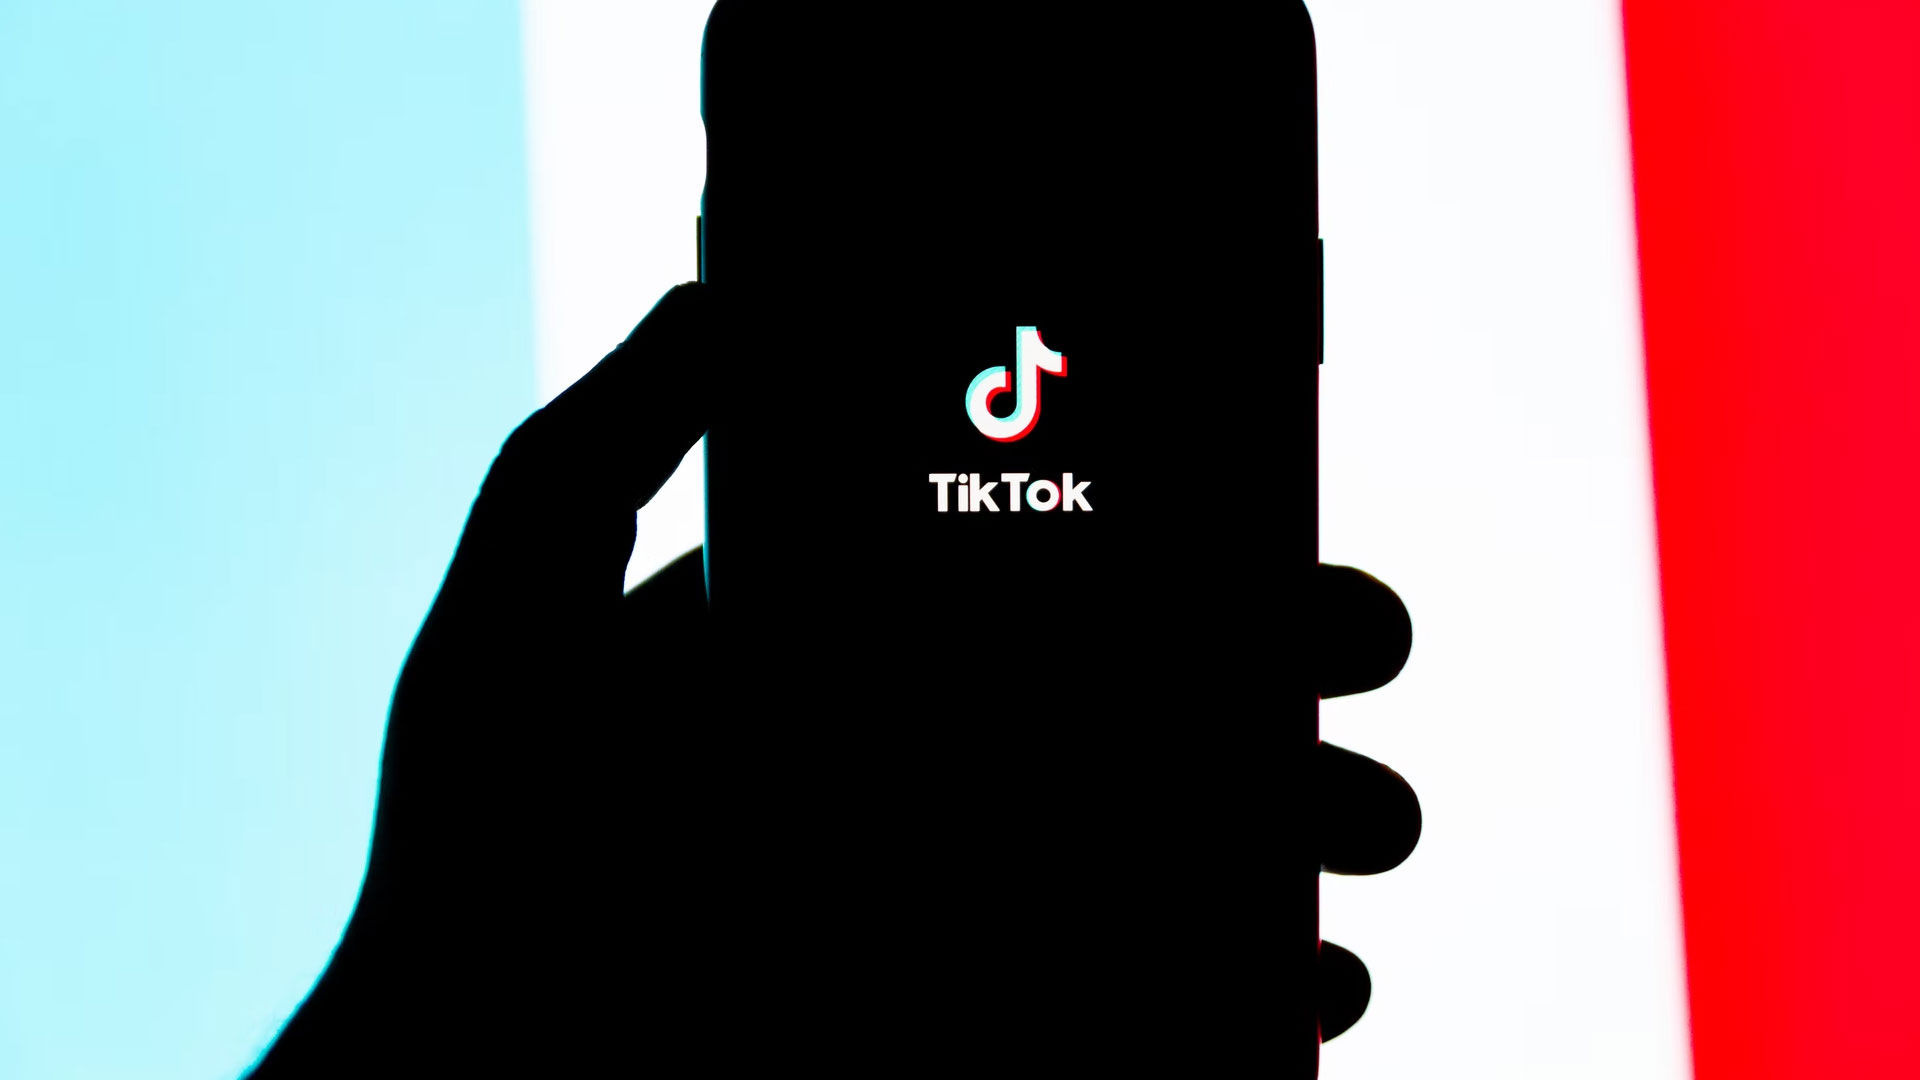 How to Make a TikTok Sound Your Alarm on Android